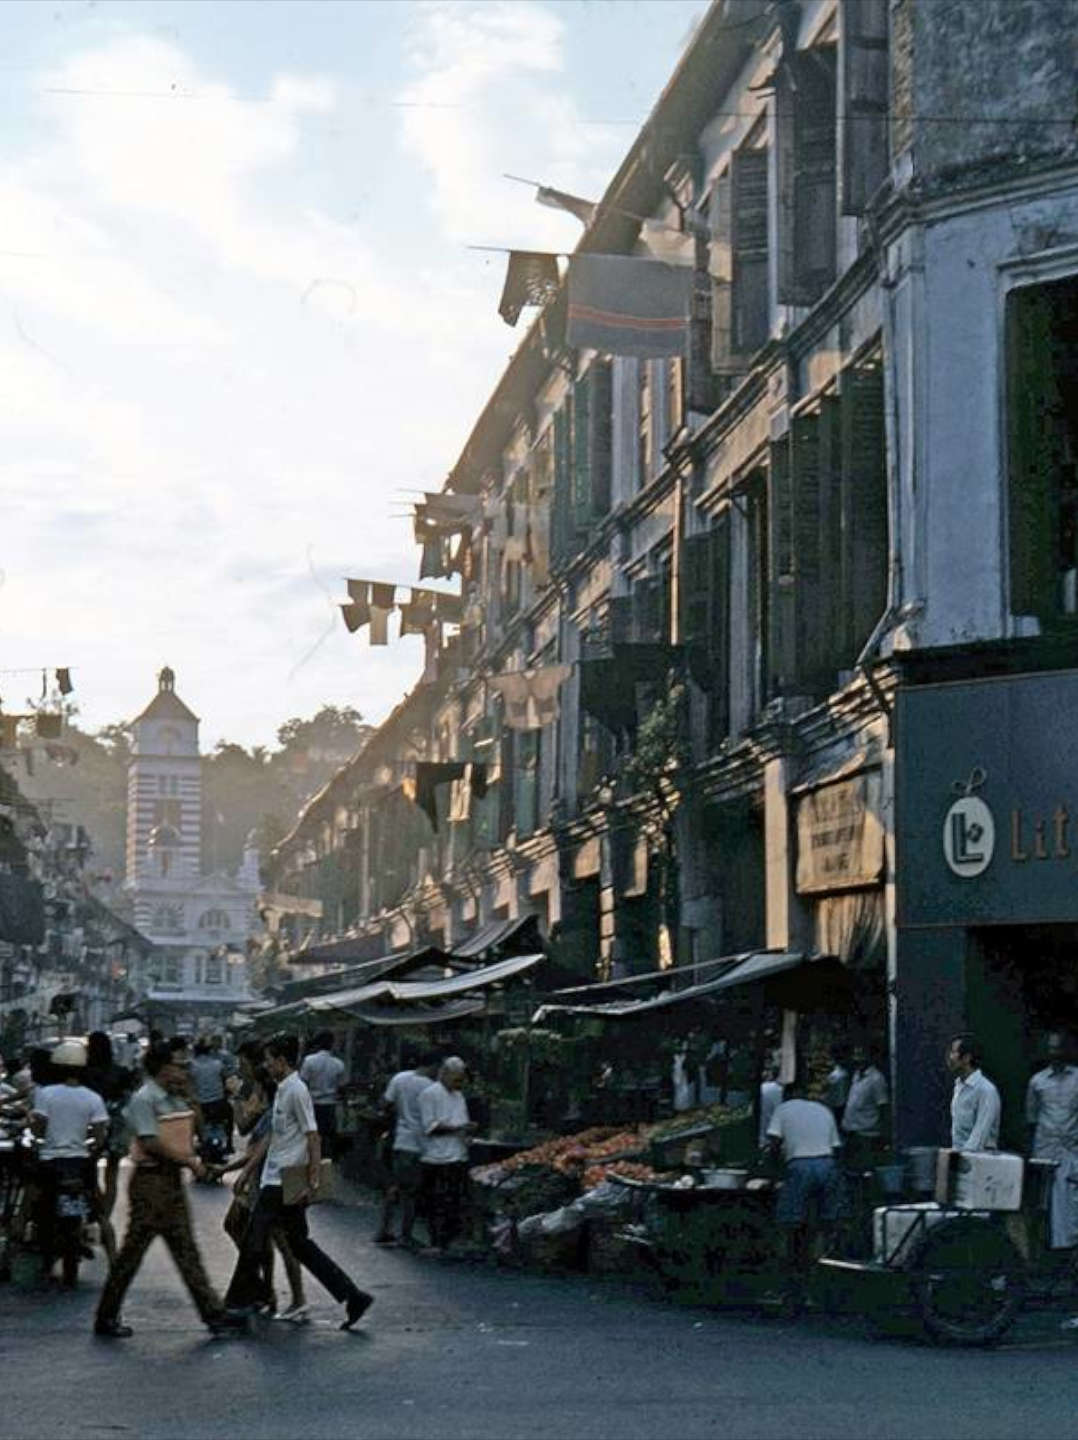 Shophouses along the old Hock Lam street in Singapore during the 1960s